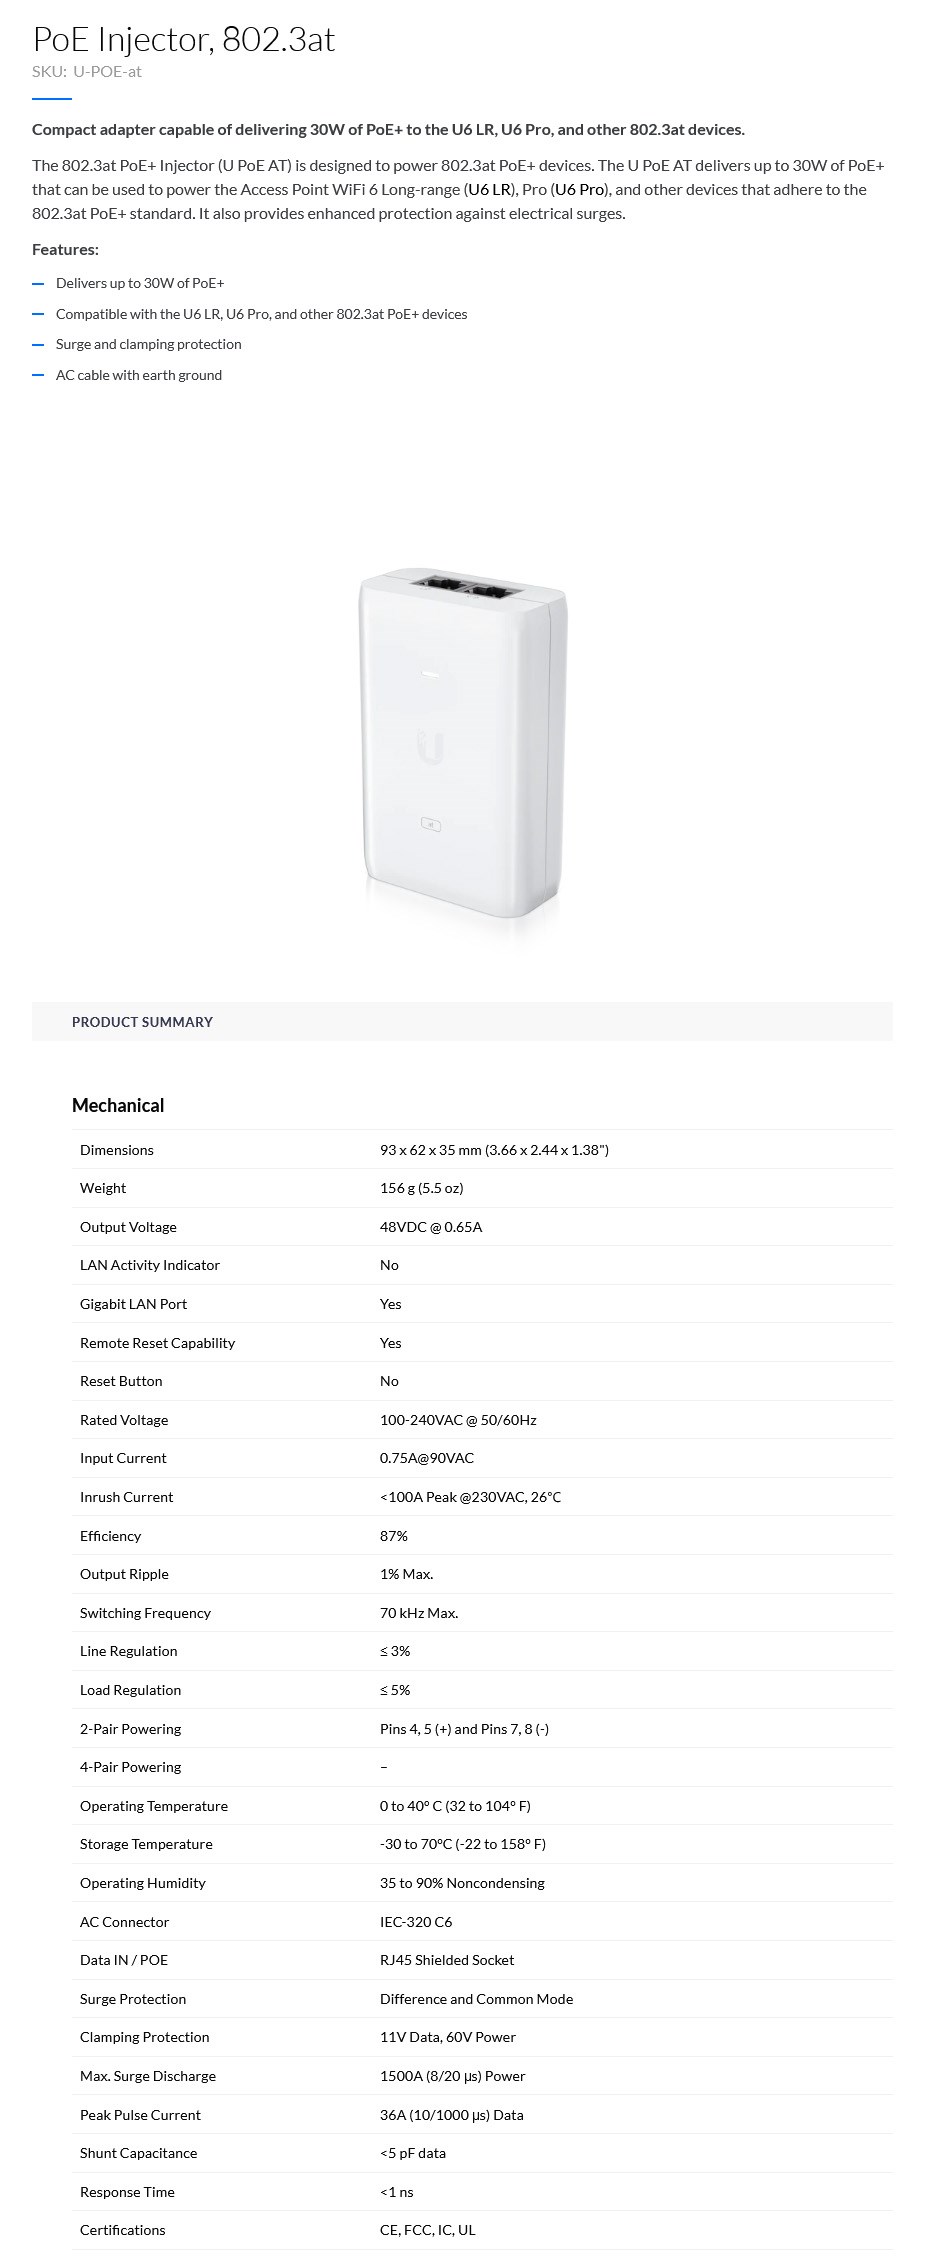 A large marketing image providing additional information about the product Ubiquiti POE 802.3at Injector - Additional alt info not provided